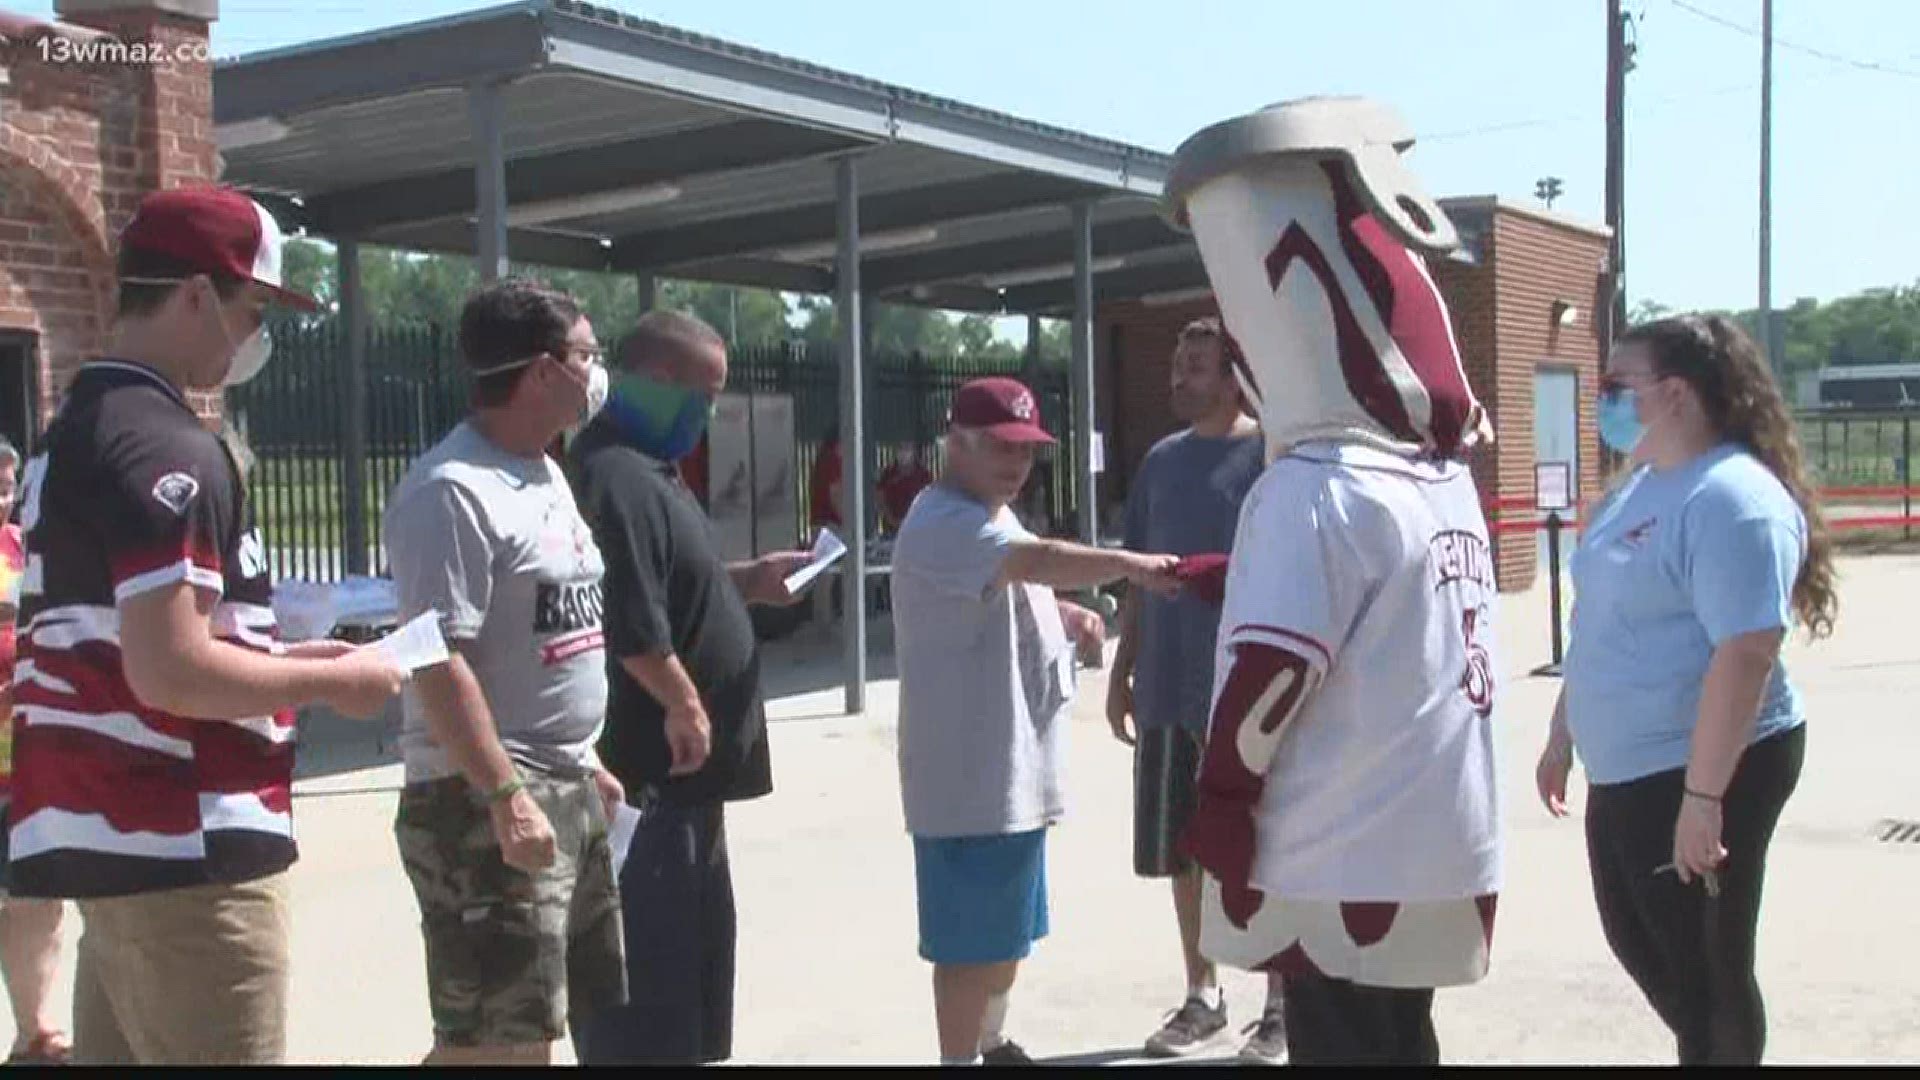 The event highlighted the new industrial size fans at Luther Williams Field.